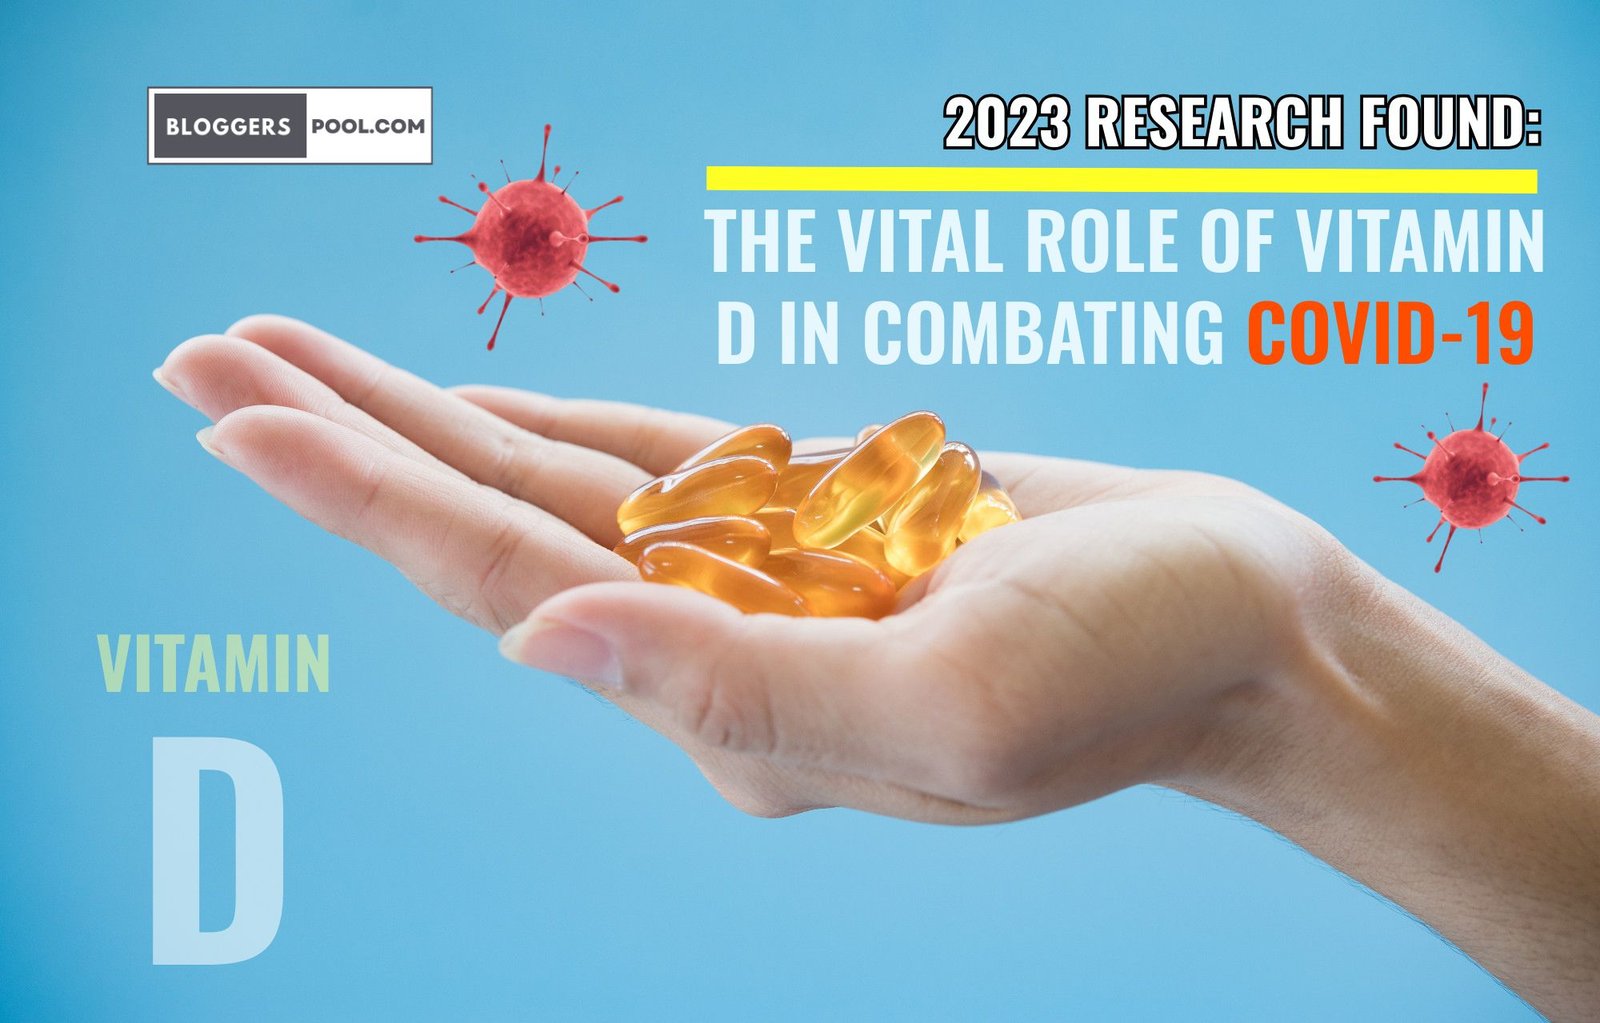 2023 Research found The Vital Role of Vitamin D in Combating COVID-19